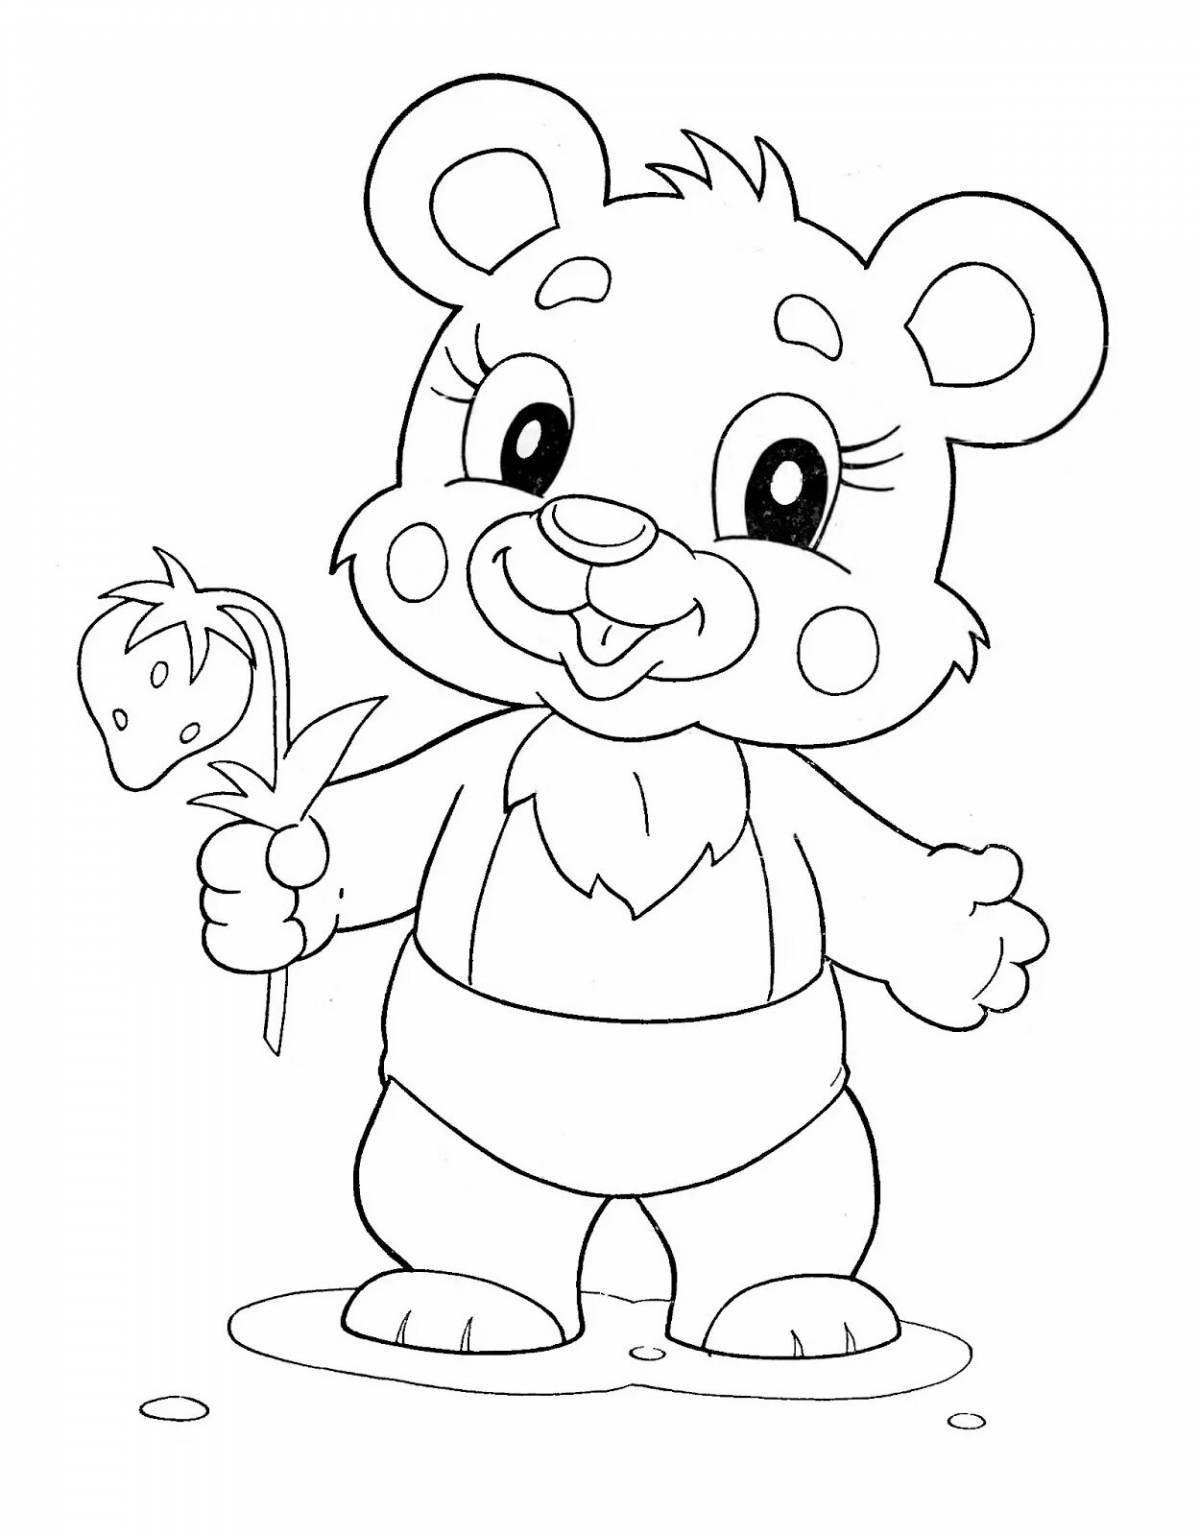 Coloring book for a child 4-5 years old